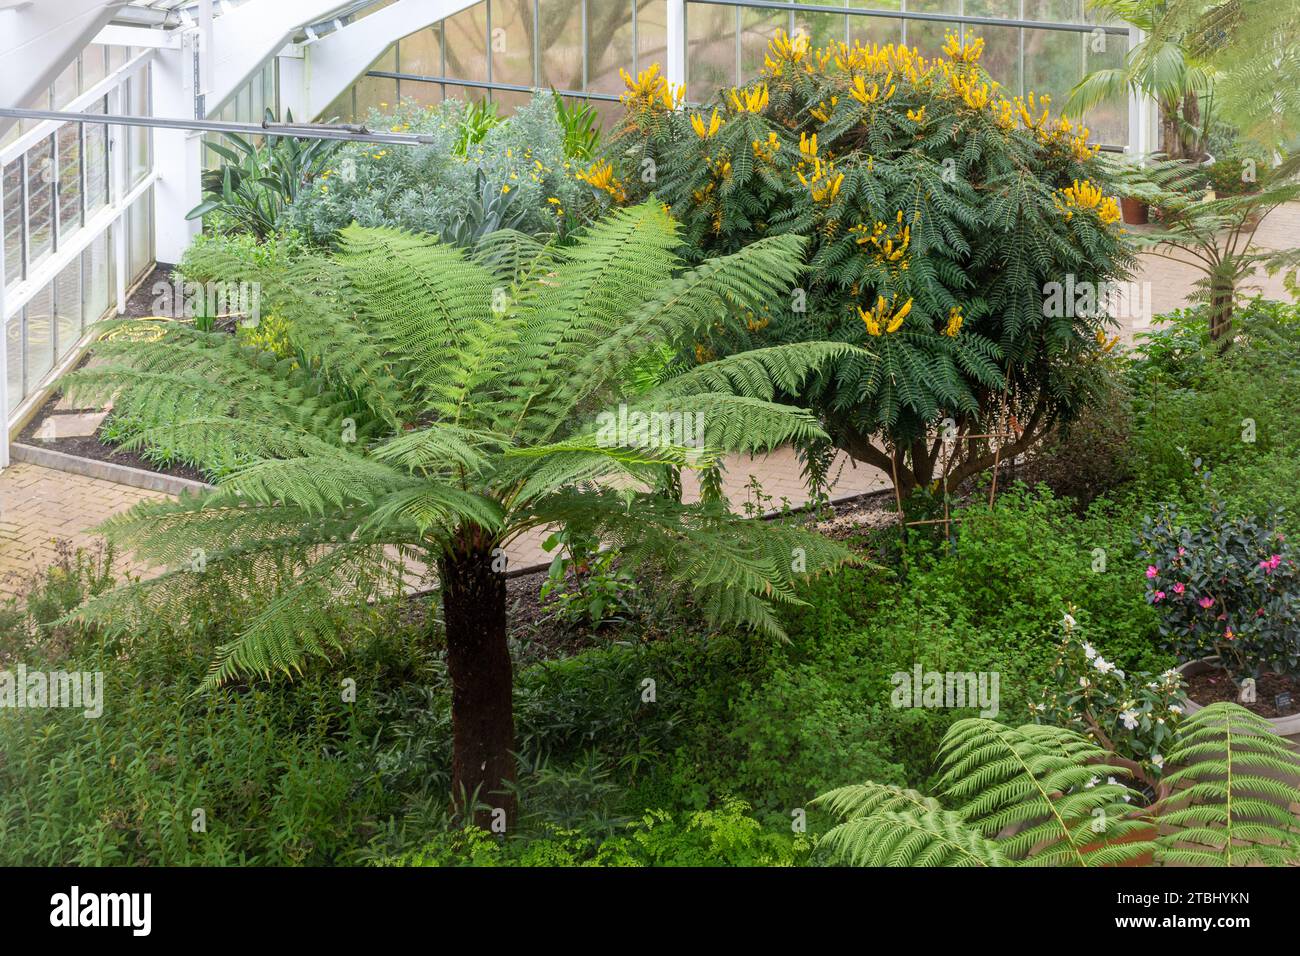 View of plants including a large tree fern and Mahonia oiwakensis shrub in the Queen Elizabeth Temperate House at Savill Gardens, England, UK Stock Photo